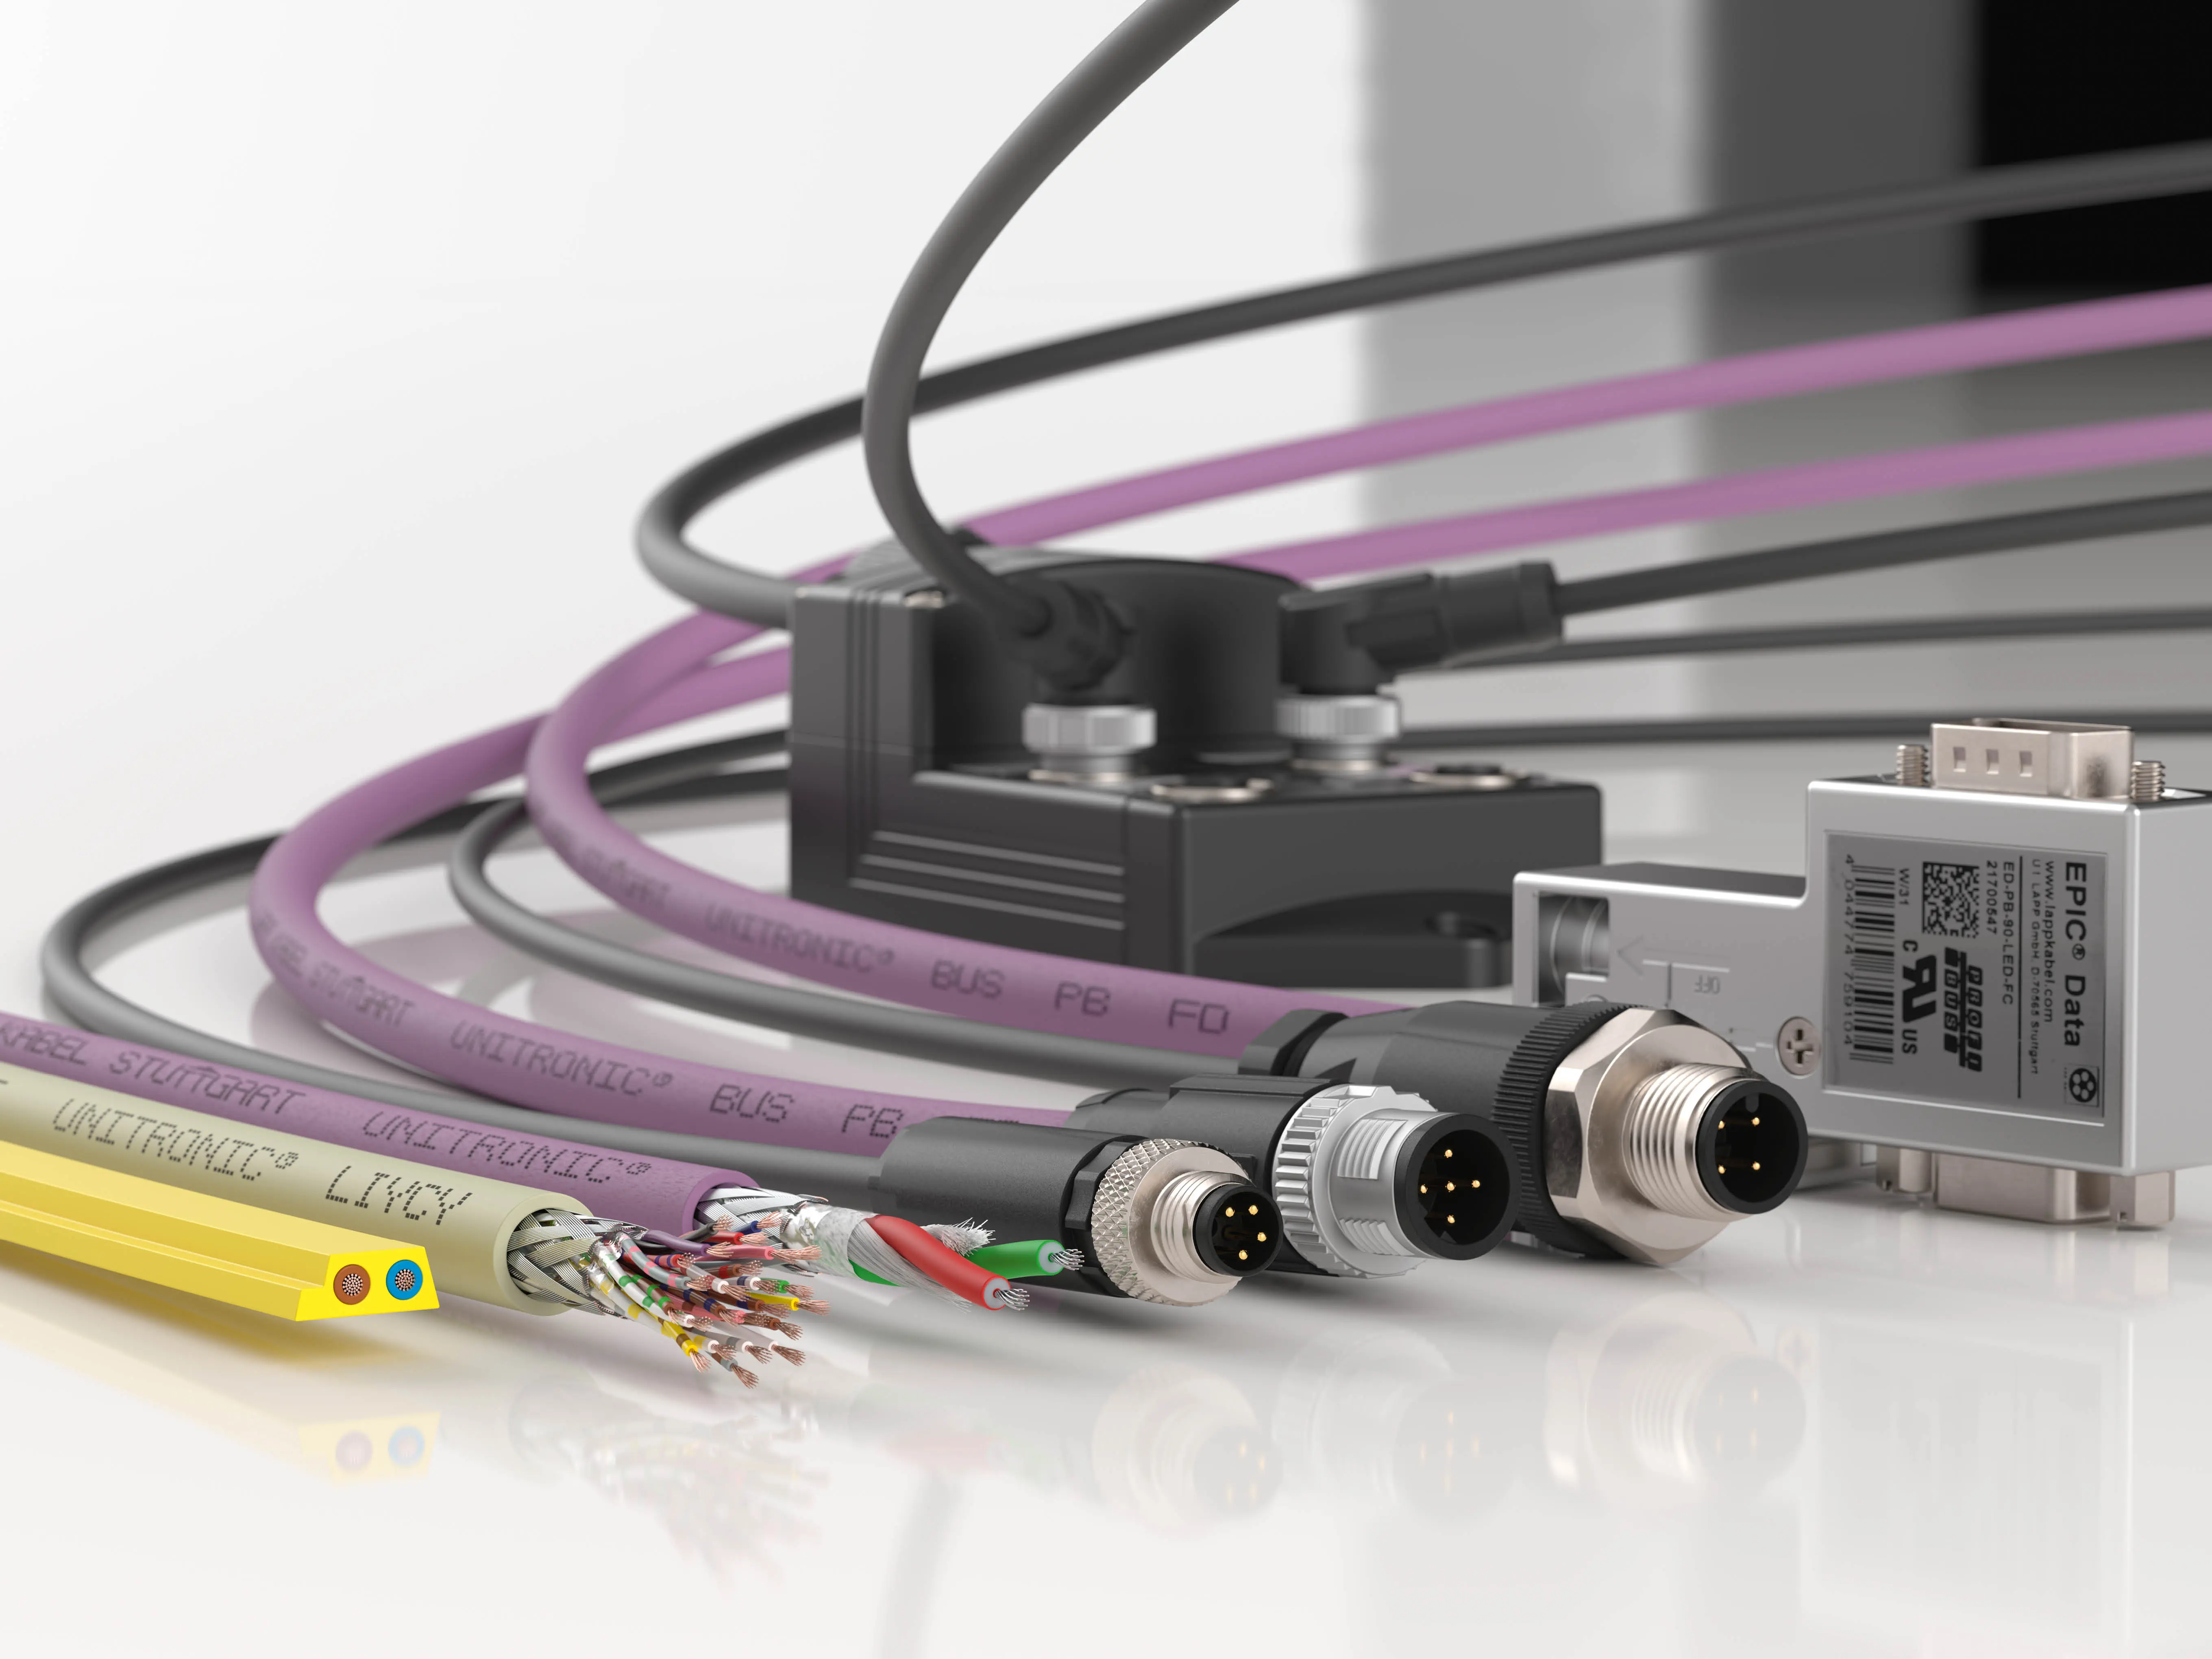 UNITRONIC® data cables and fieldbus components from LAPP